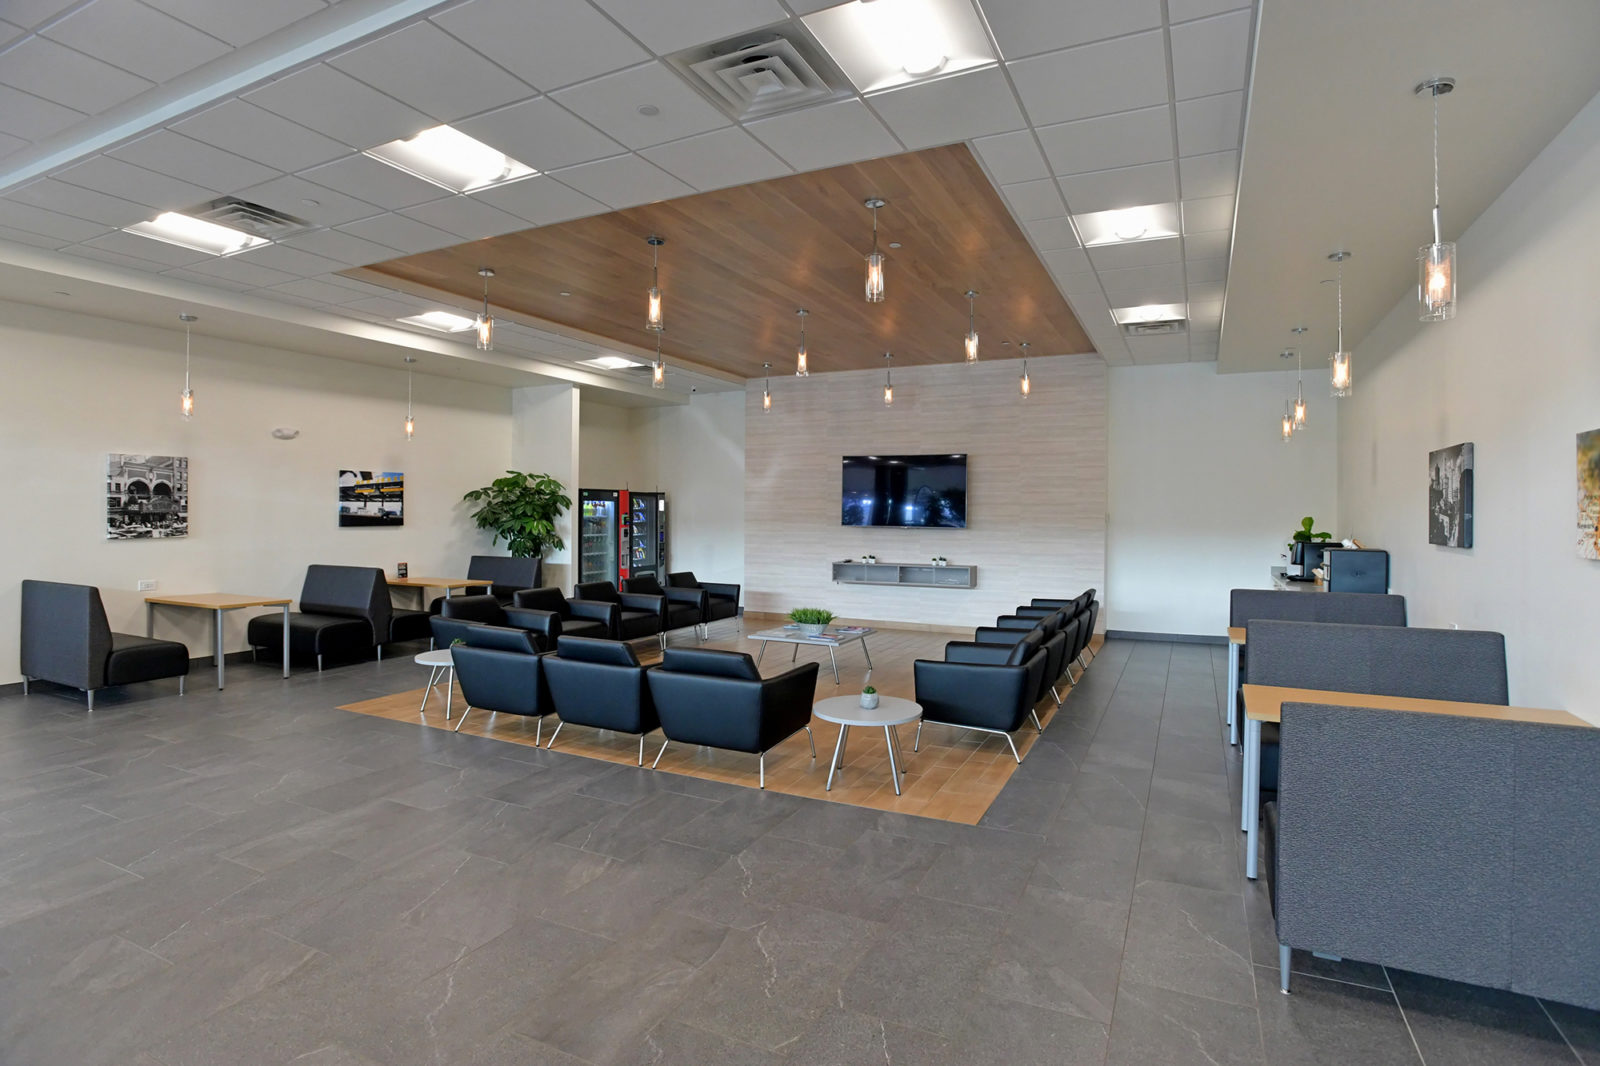 Waiting area of car dealership with booths along the walls and a cluster of black leather club chairs in the center of the room.